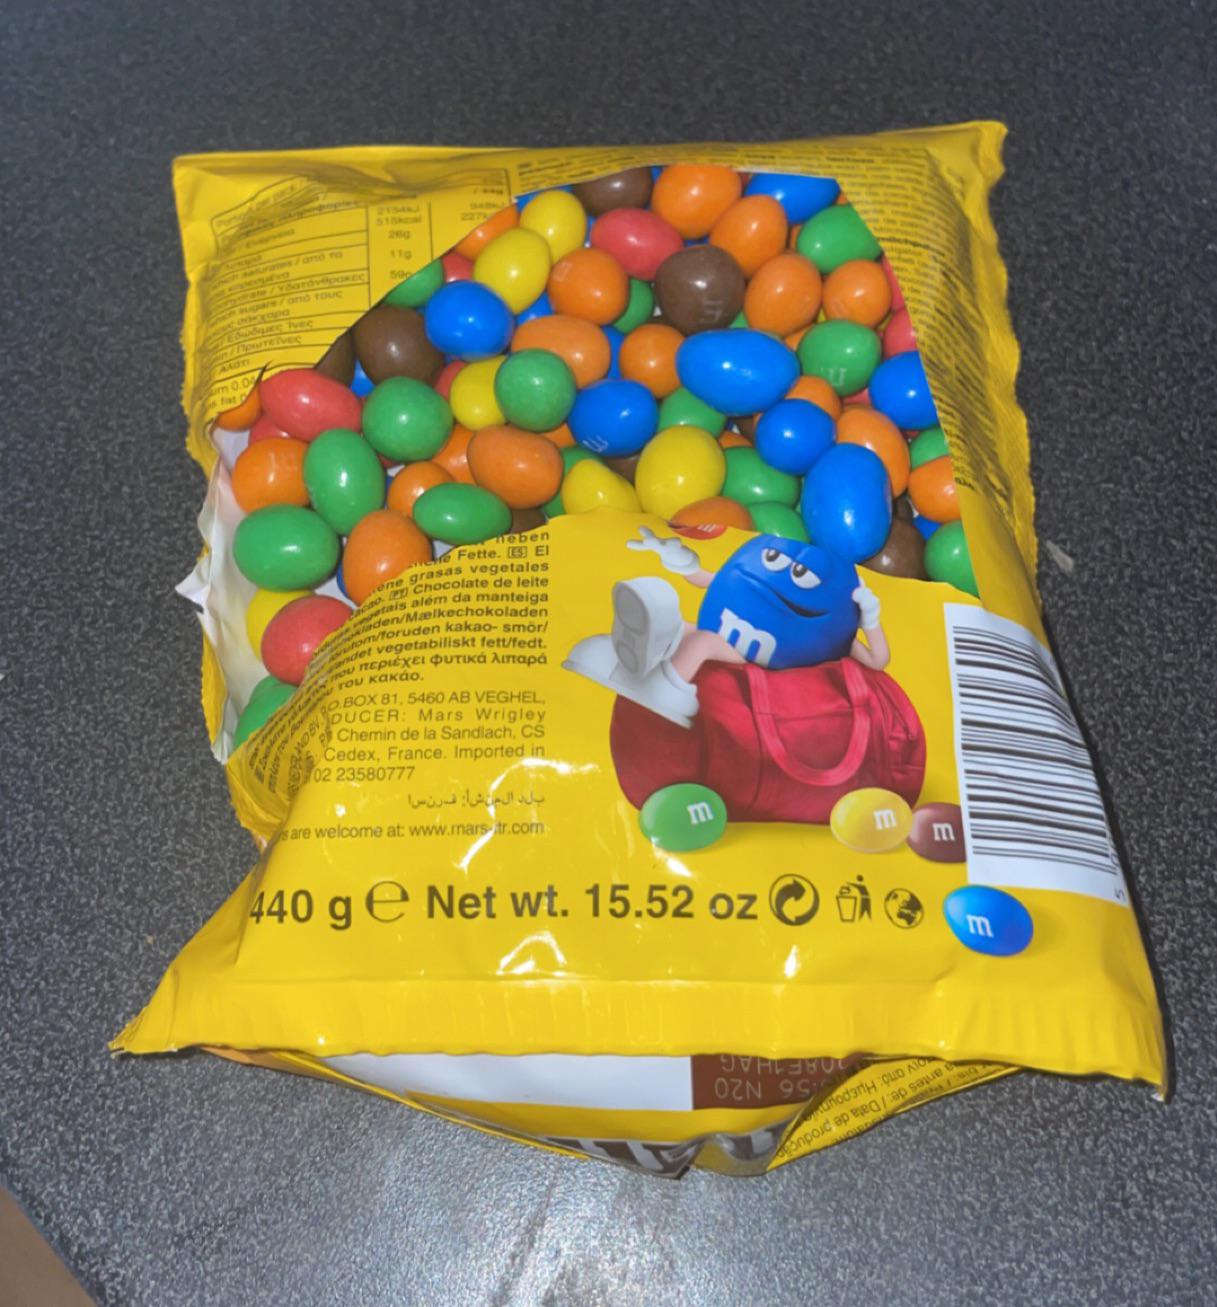 How my friend opened a pack of M&Ms.